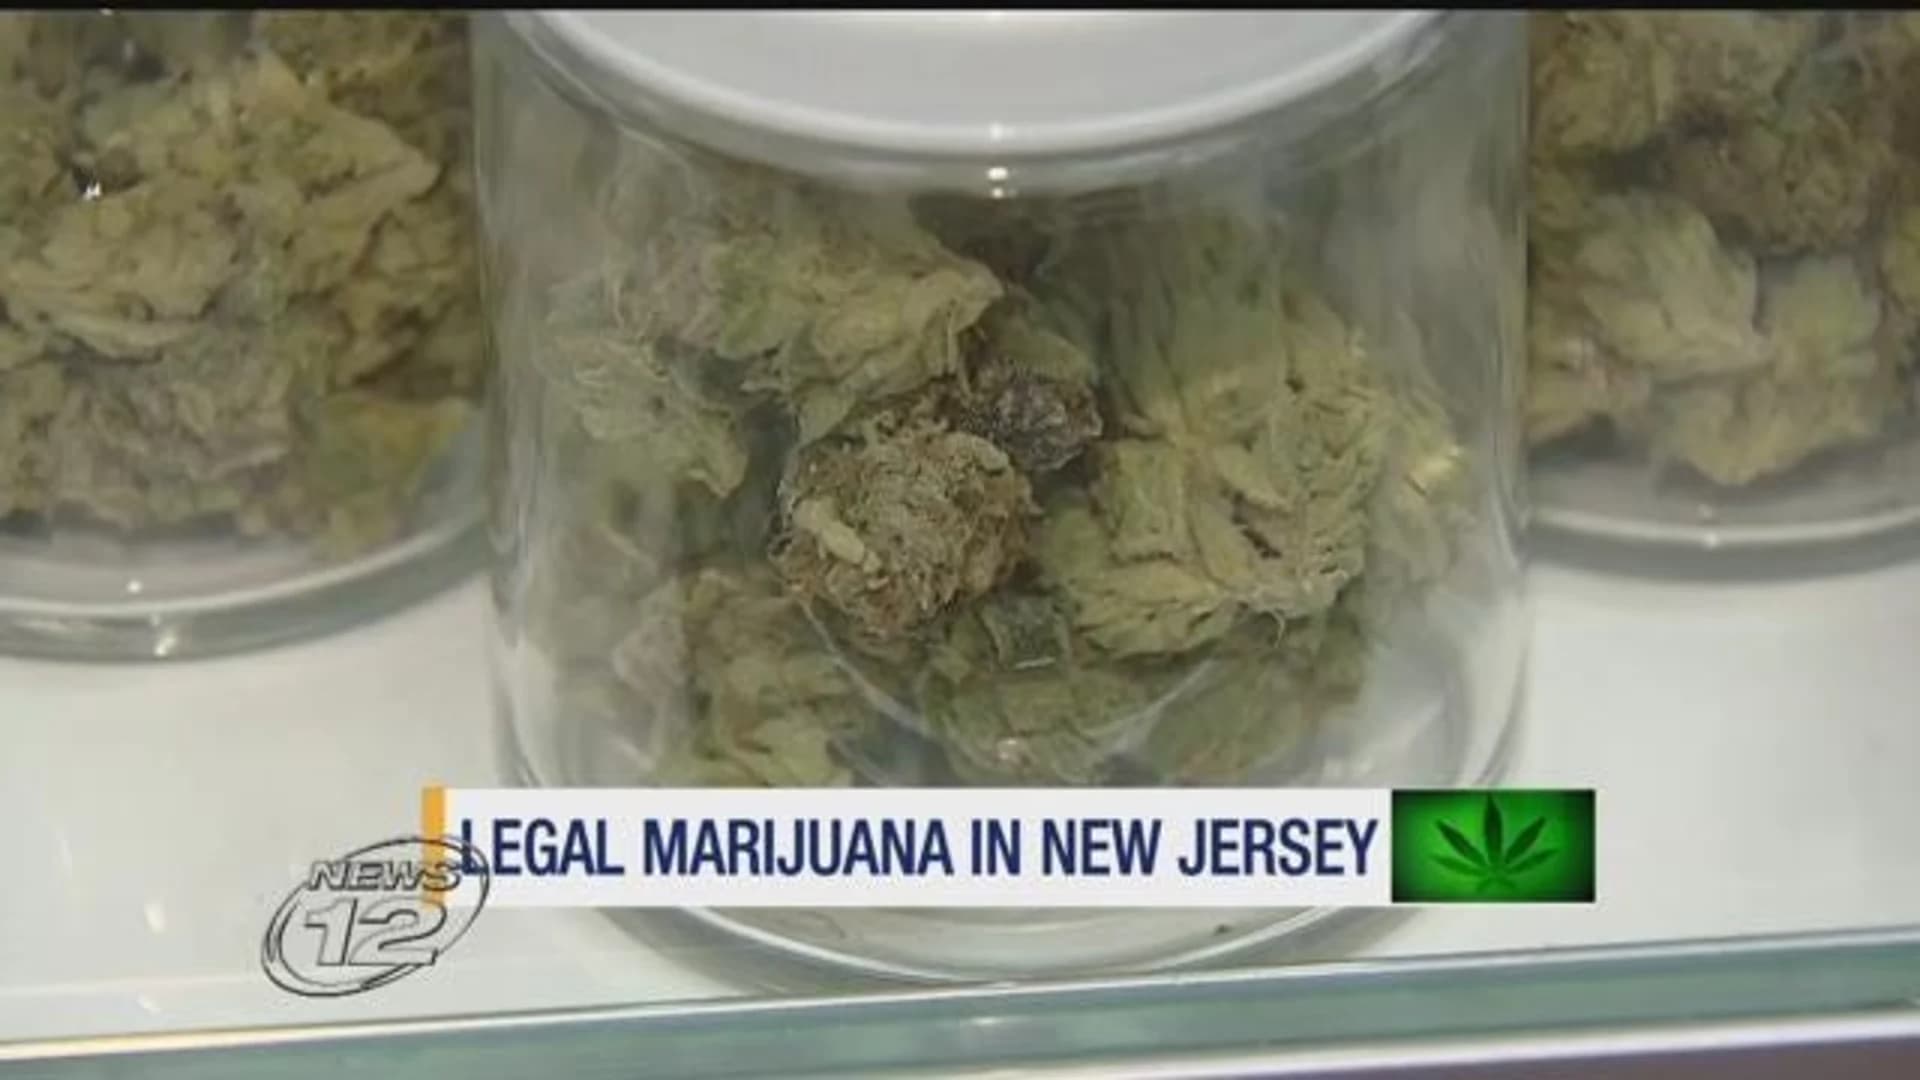 Reports: NJ lawmakers hope to vote on recreational marijuana this month